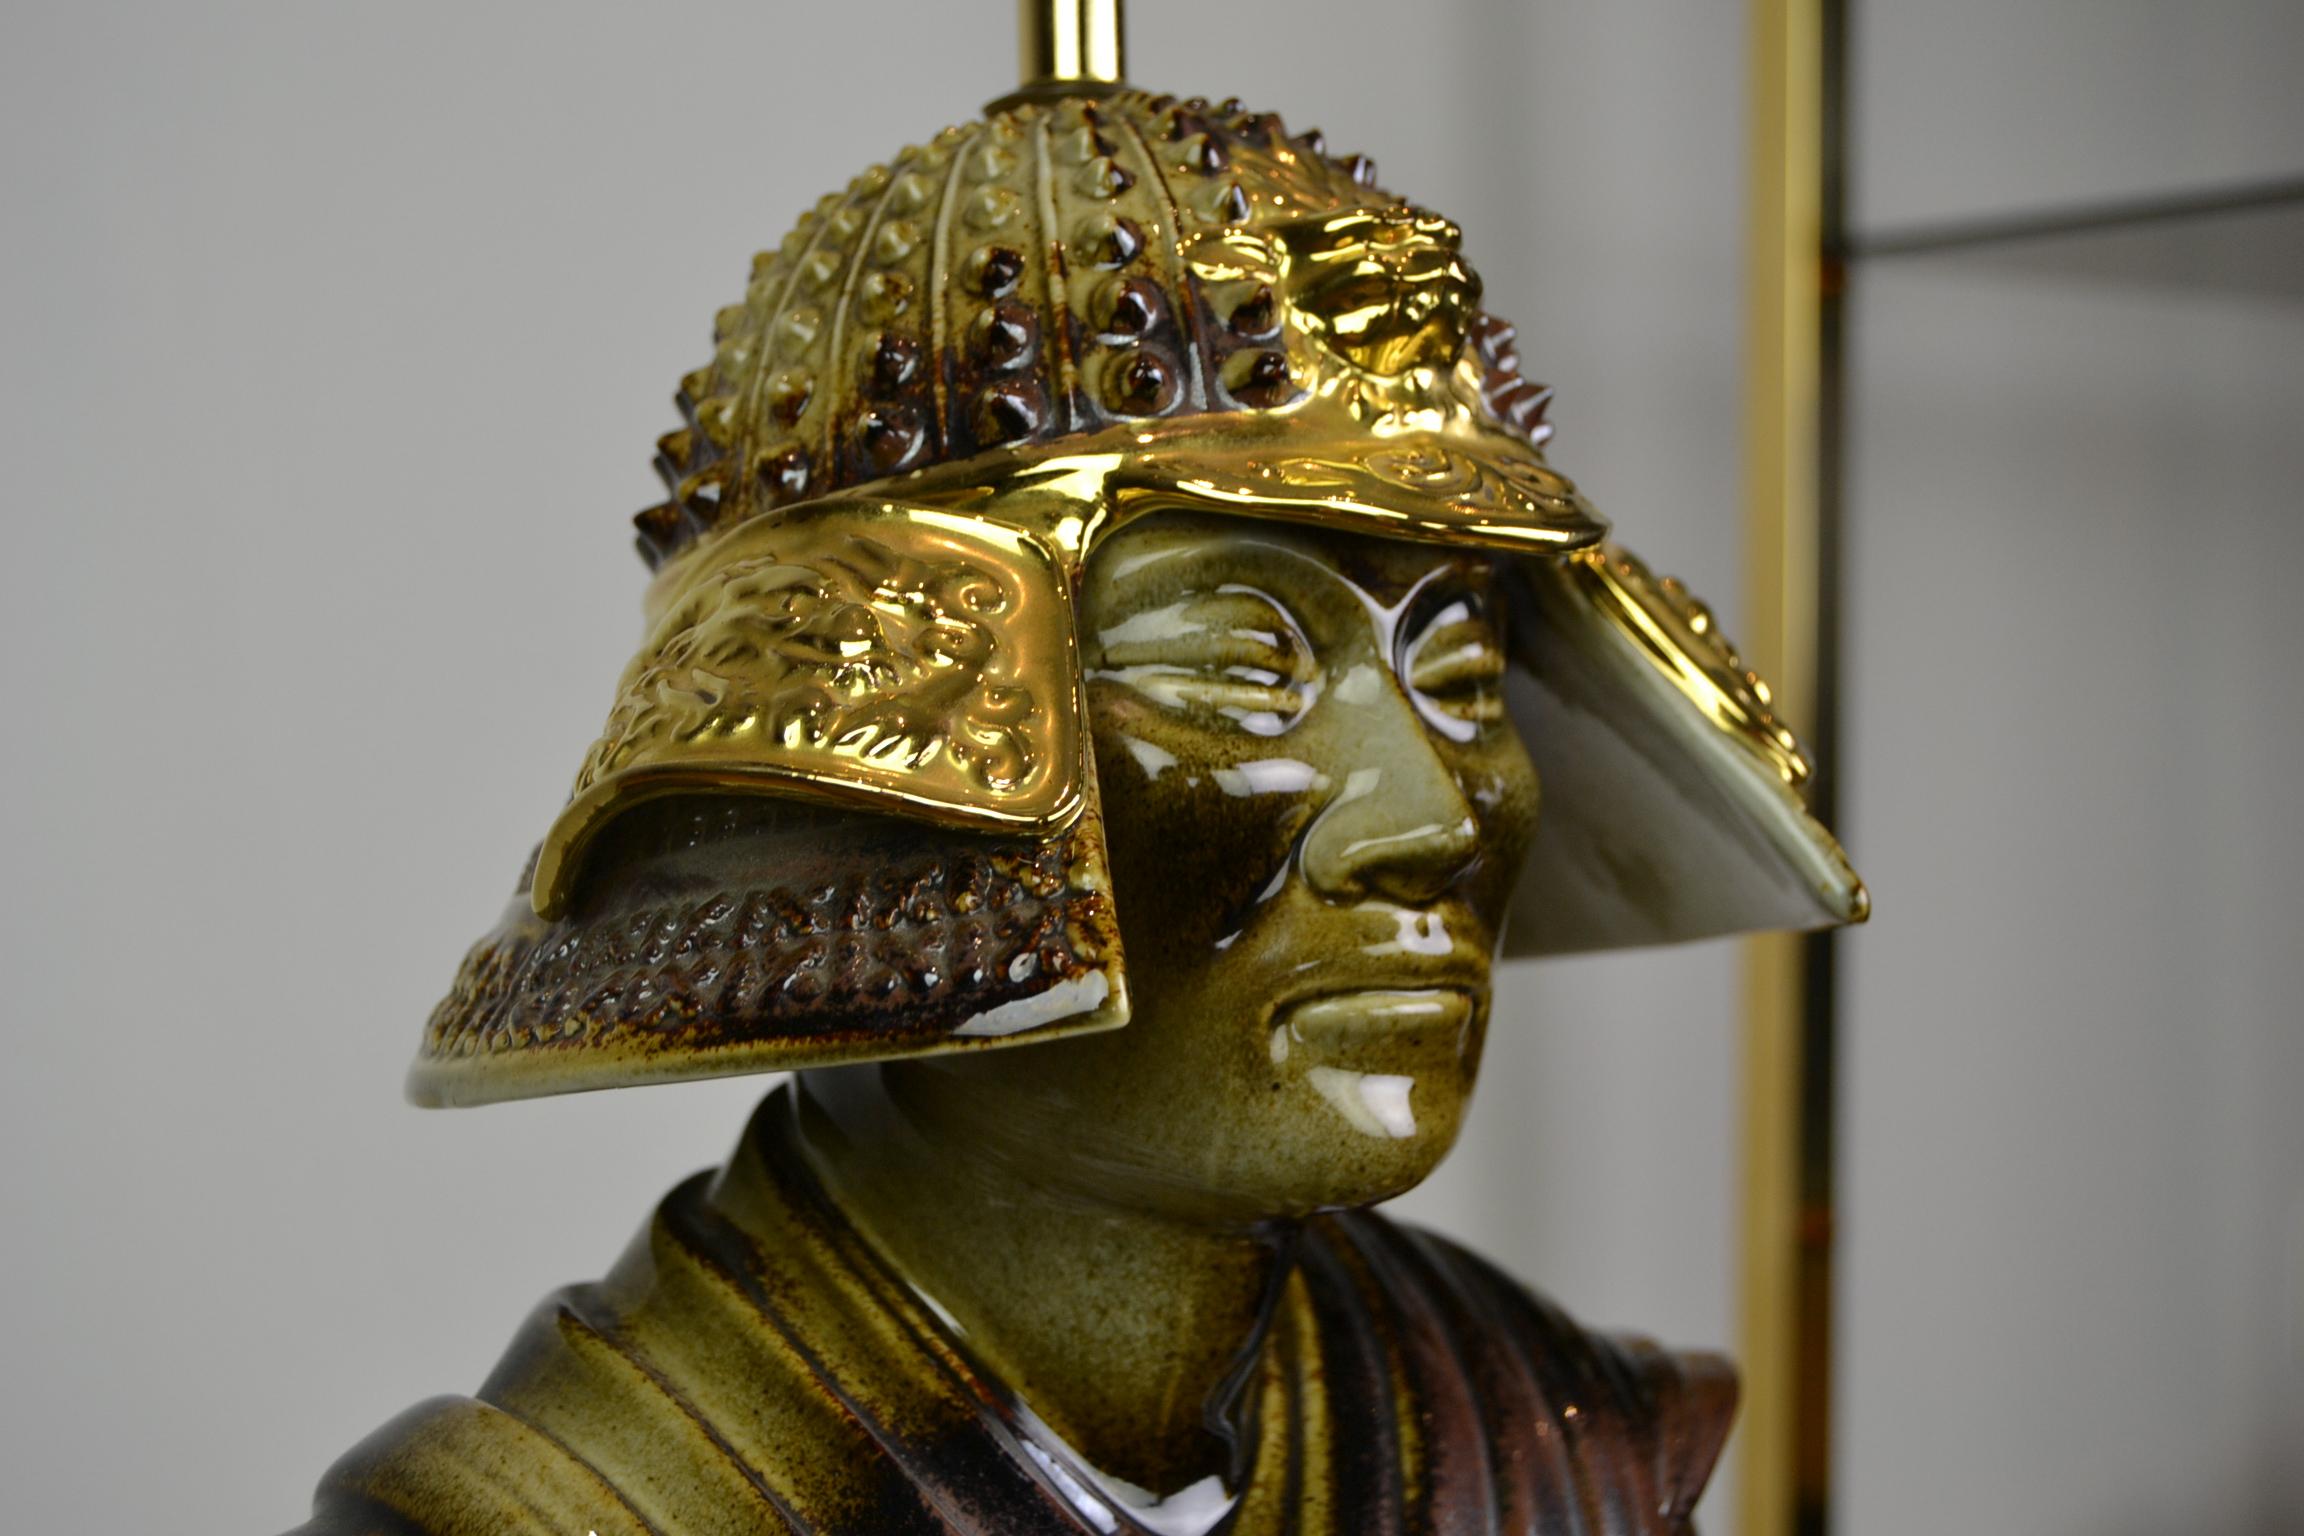 Large porcelain table lamp in the shape of a Samurai.
This brown with gold painted porcelain lamp is very detailed and beautifully made.
It's a vintage Italian Light, there is a crown stamp under with also made in Italy.
Do view all the fine